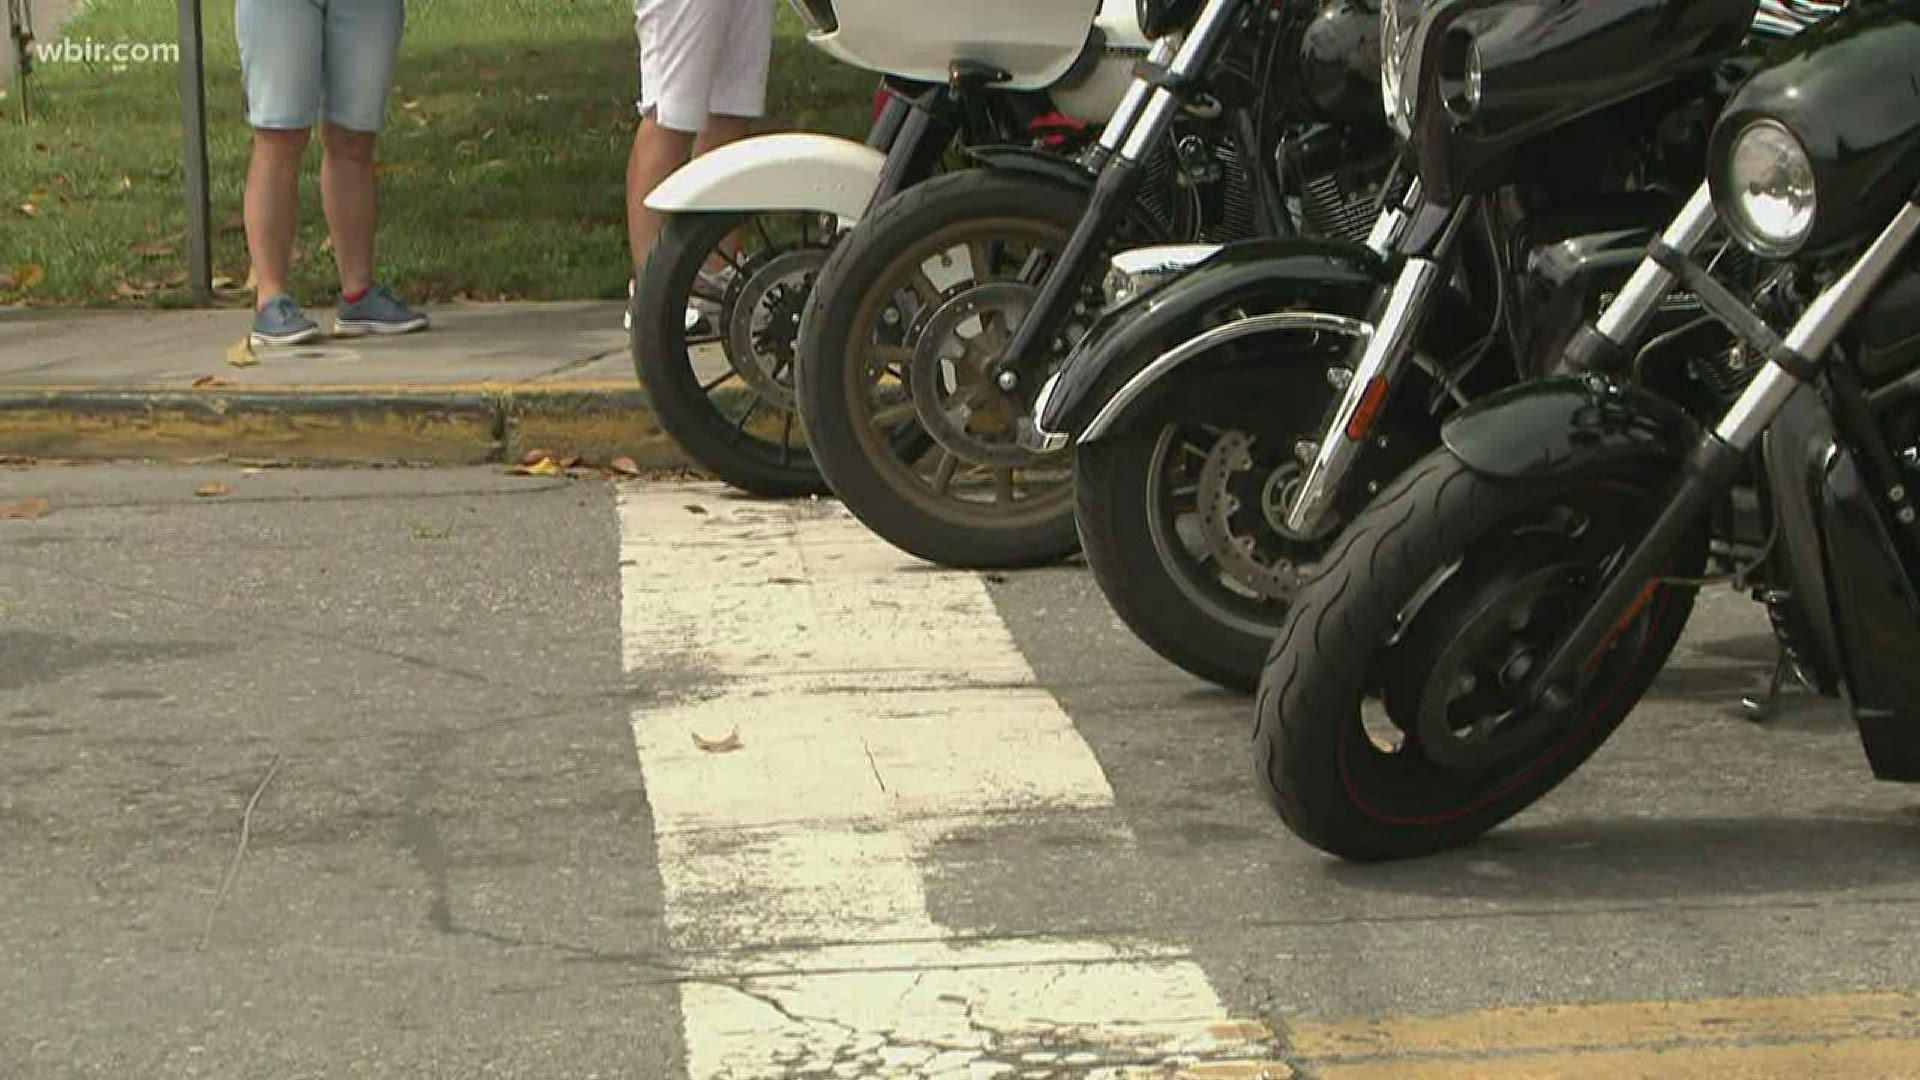 This is the 20th anniversary of the motorcycle ride that honors fallen veterans.